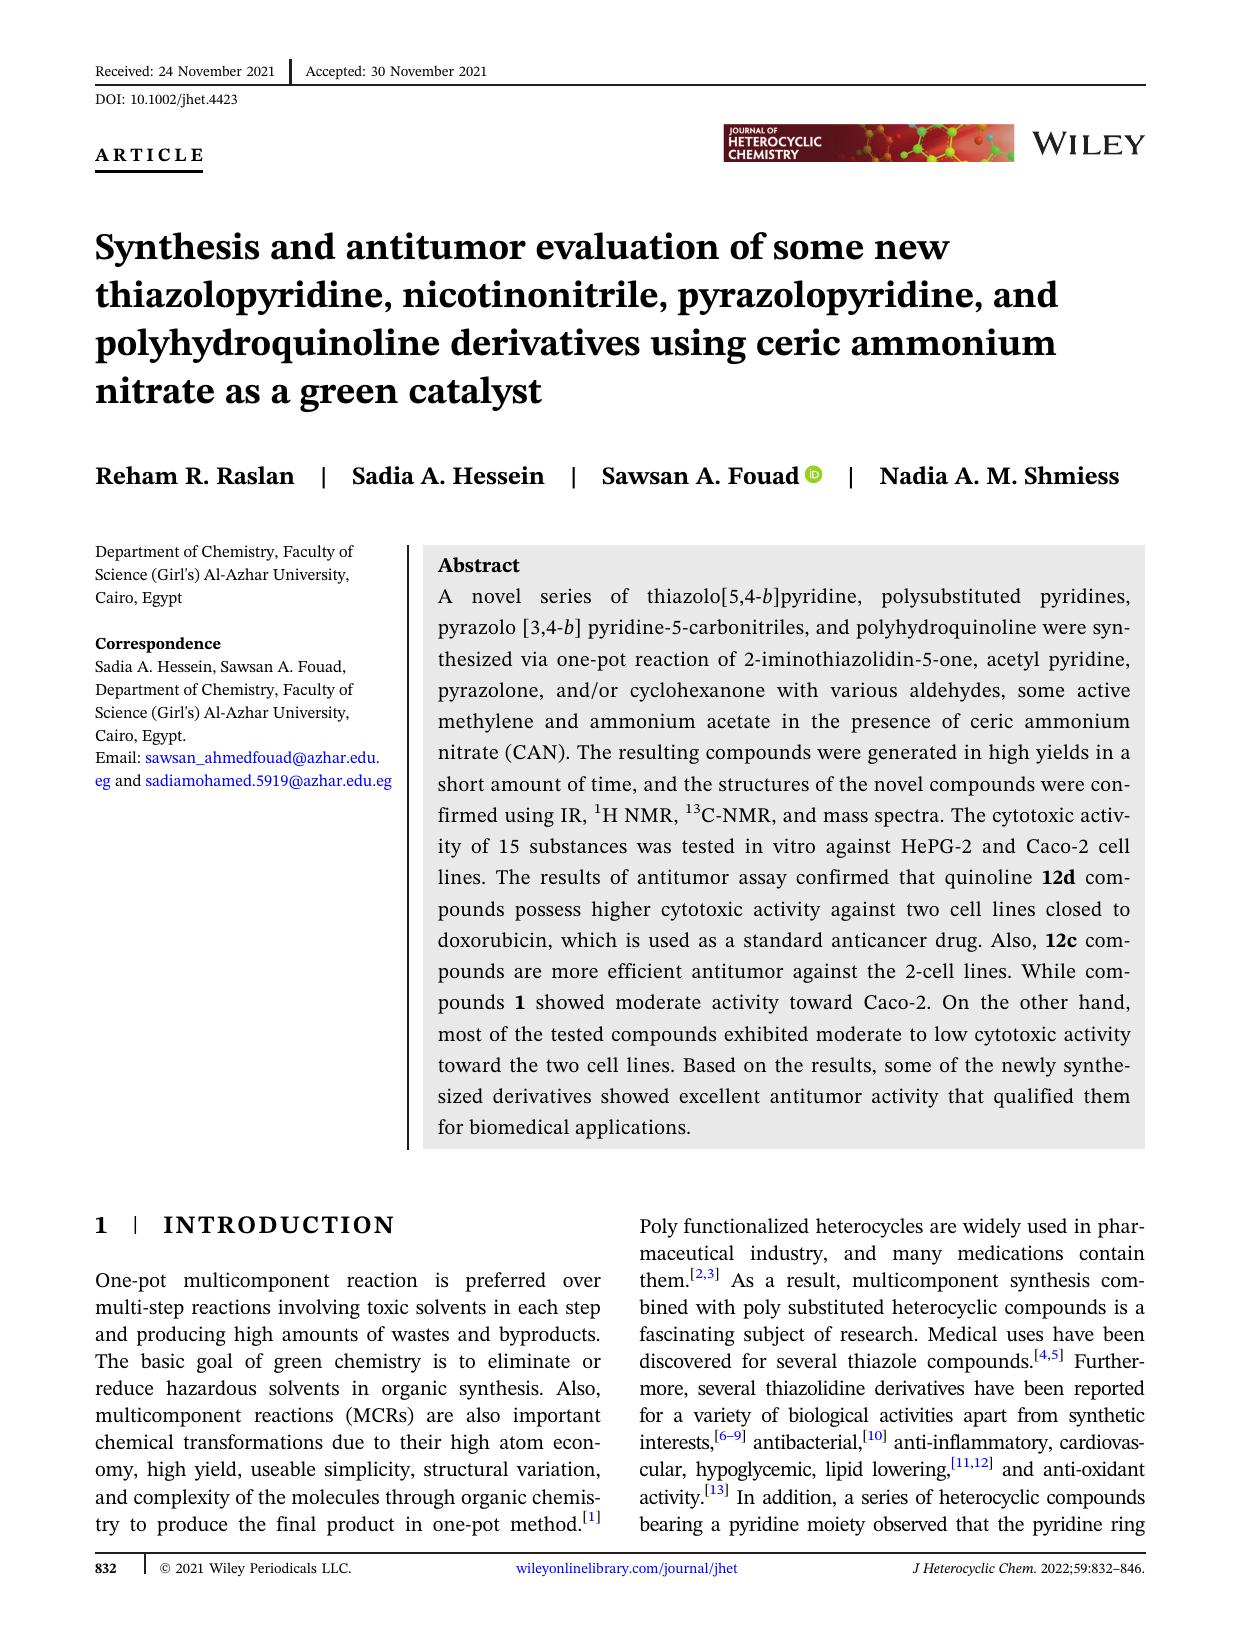 Synthesis and anti-tumor evaluation of some new thiazolopyridine, nicotinonitrile, pyrazolopyridine and polyhydroquinoline derivatives using Ceric ammonium nitrate as a green catalyst by Unknown